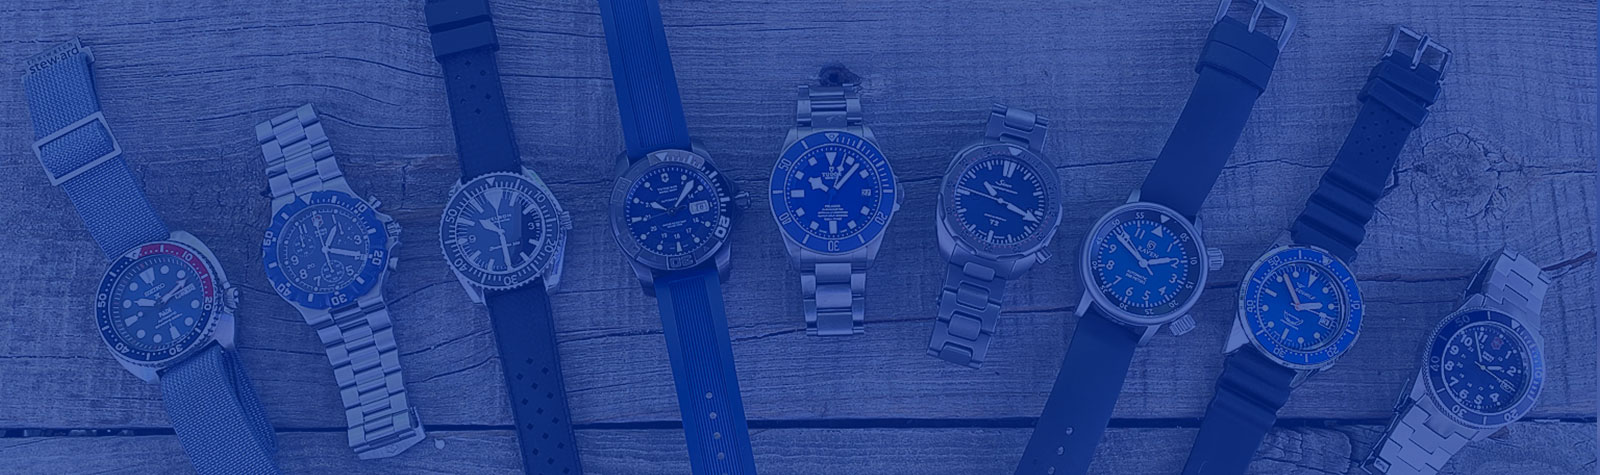 Buying a Tudor Pelagos to Replace a Pile of Blue Watches